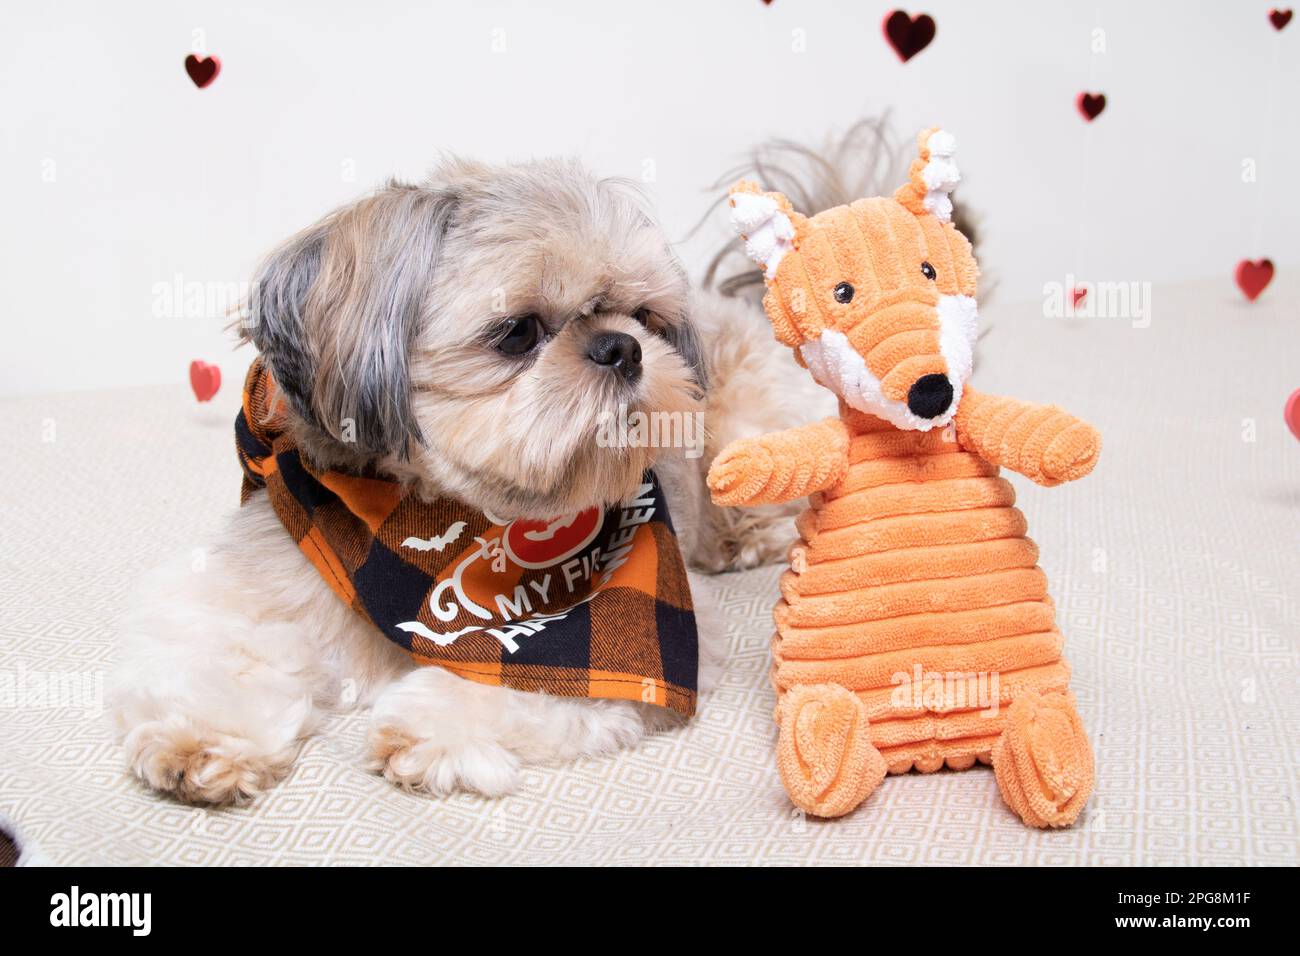 A Small Shih Tzu Dog surrounded by his cuddly toys Stock Photo - Alamy